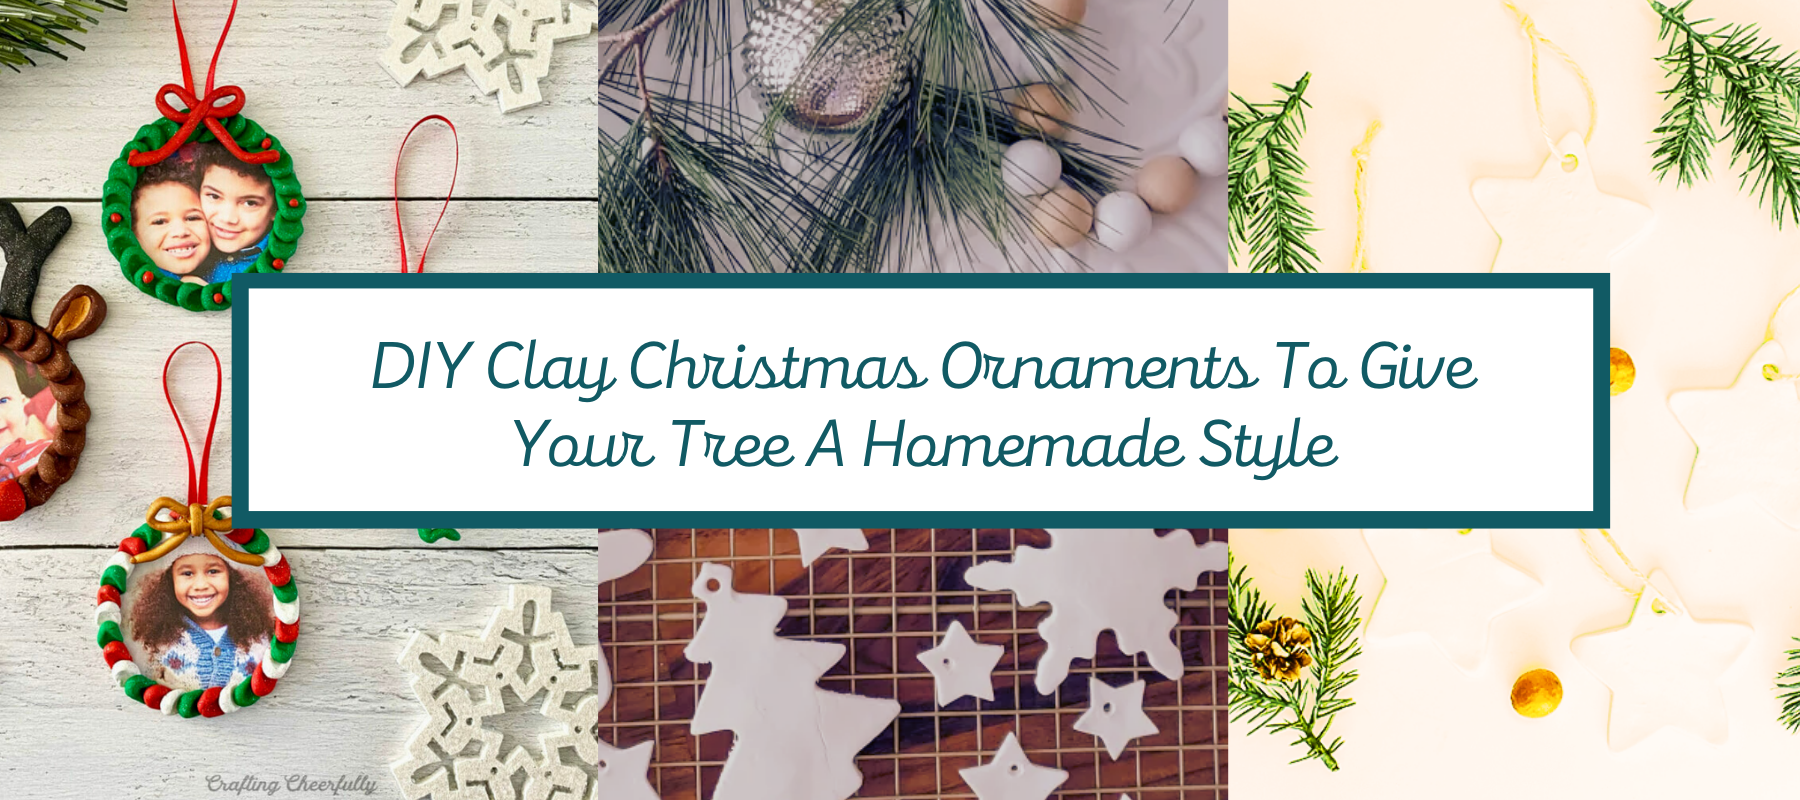 DIY Clay Christmas Ornaments To Give Your Tree A Homemade Style